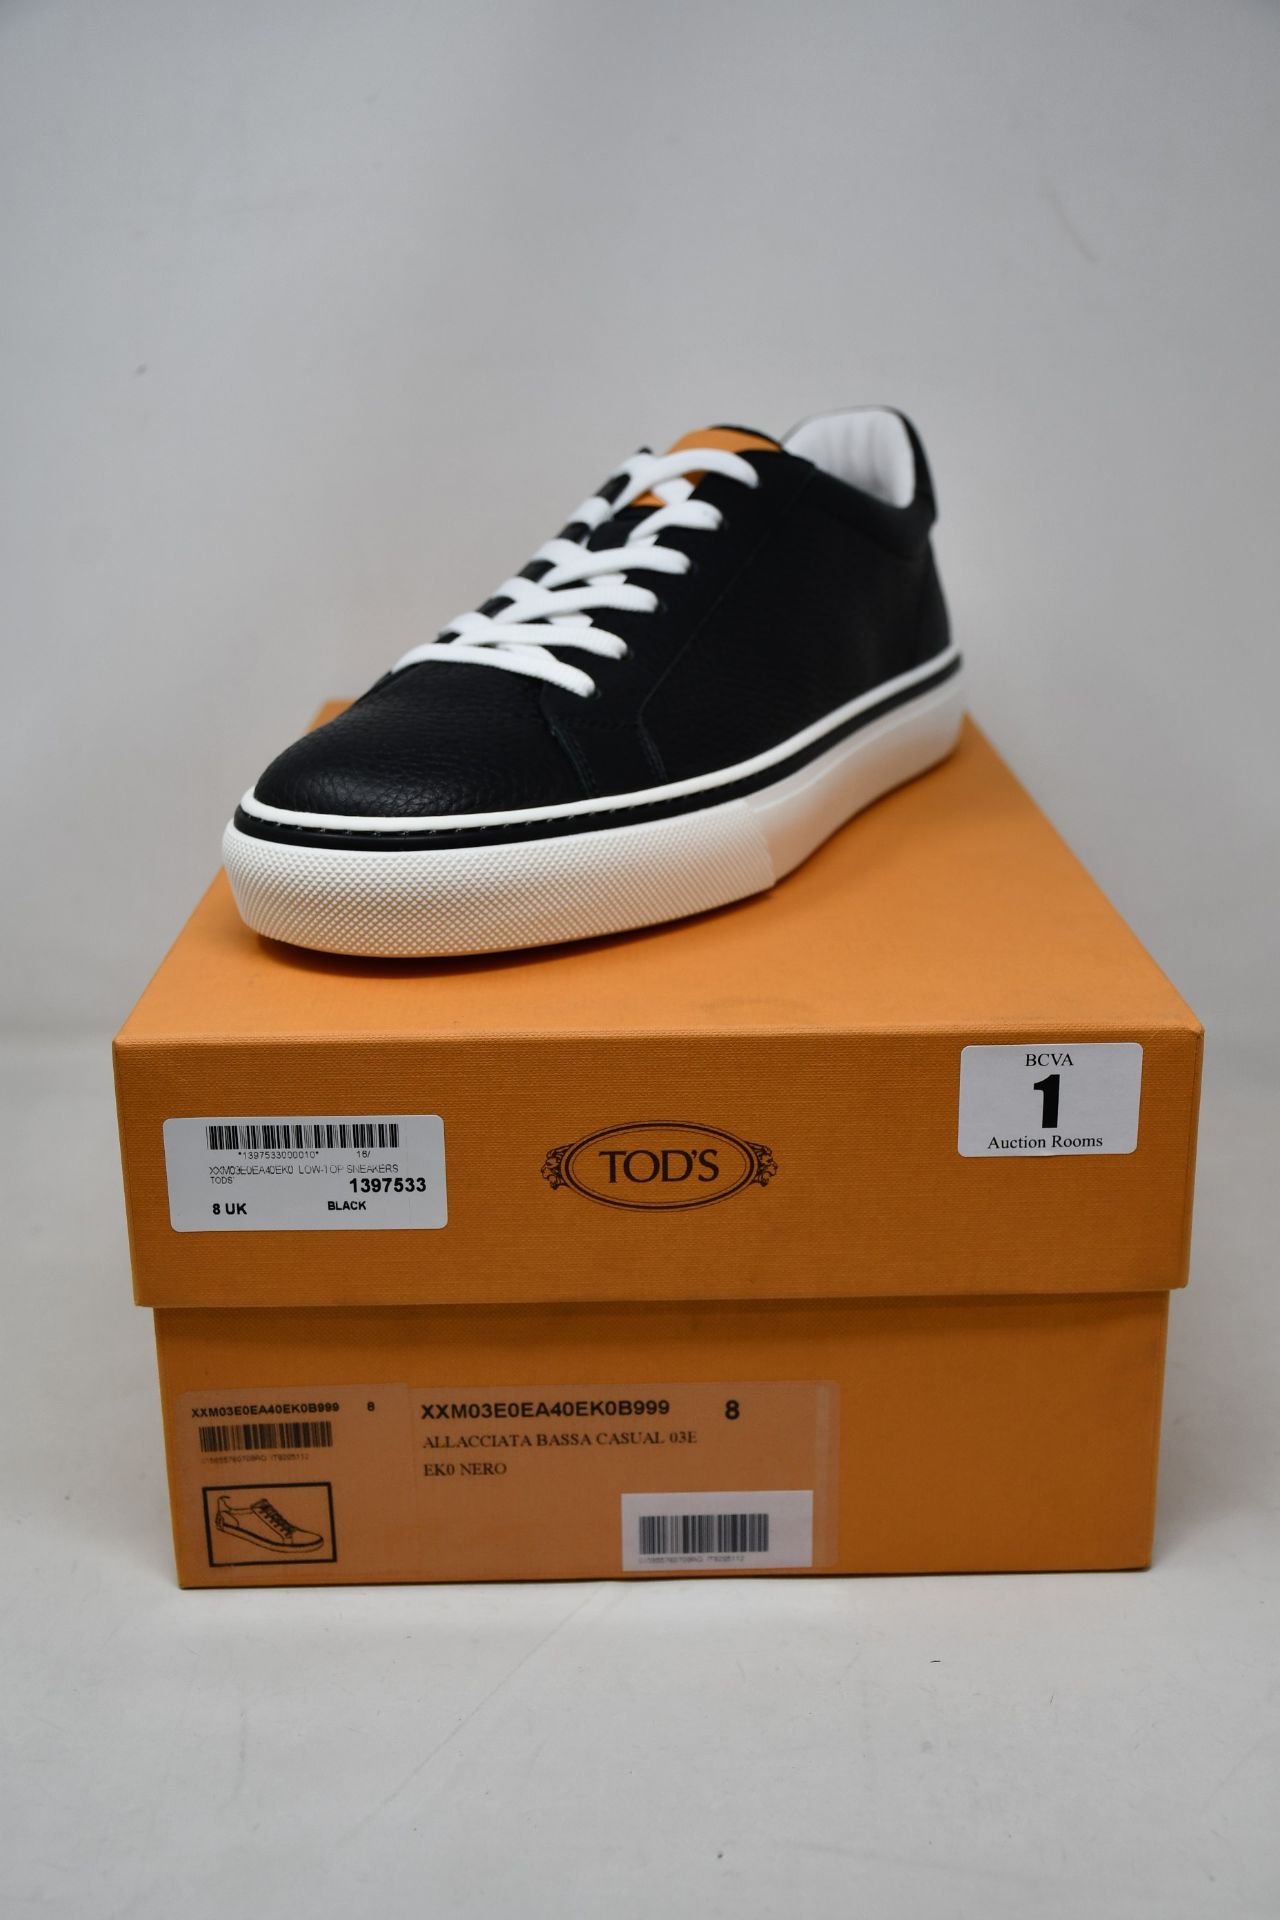 A pair of as new boxed Tod's Allacciata Bassa casual sneaker in black (UK 8).